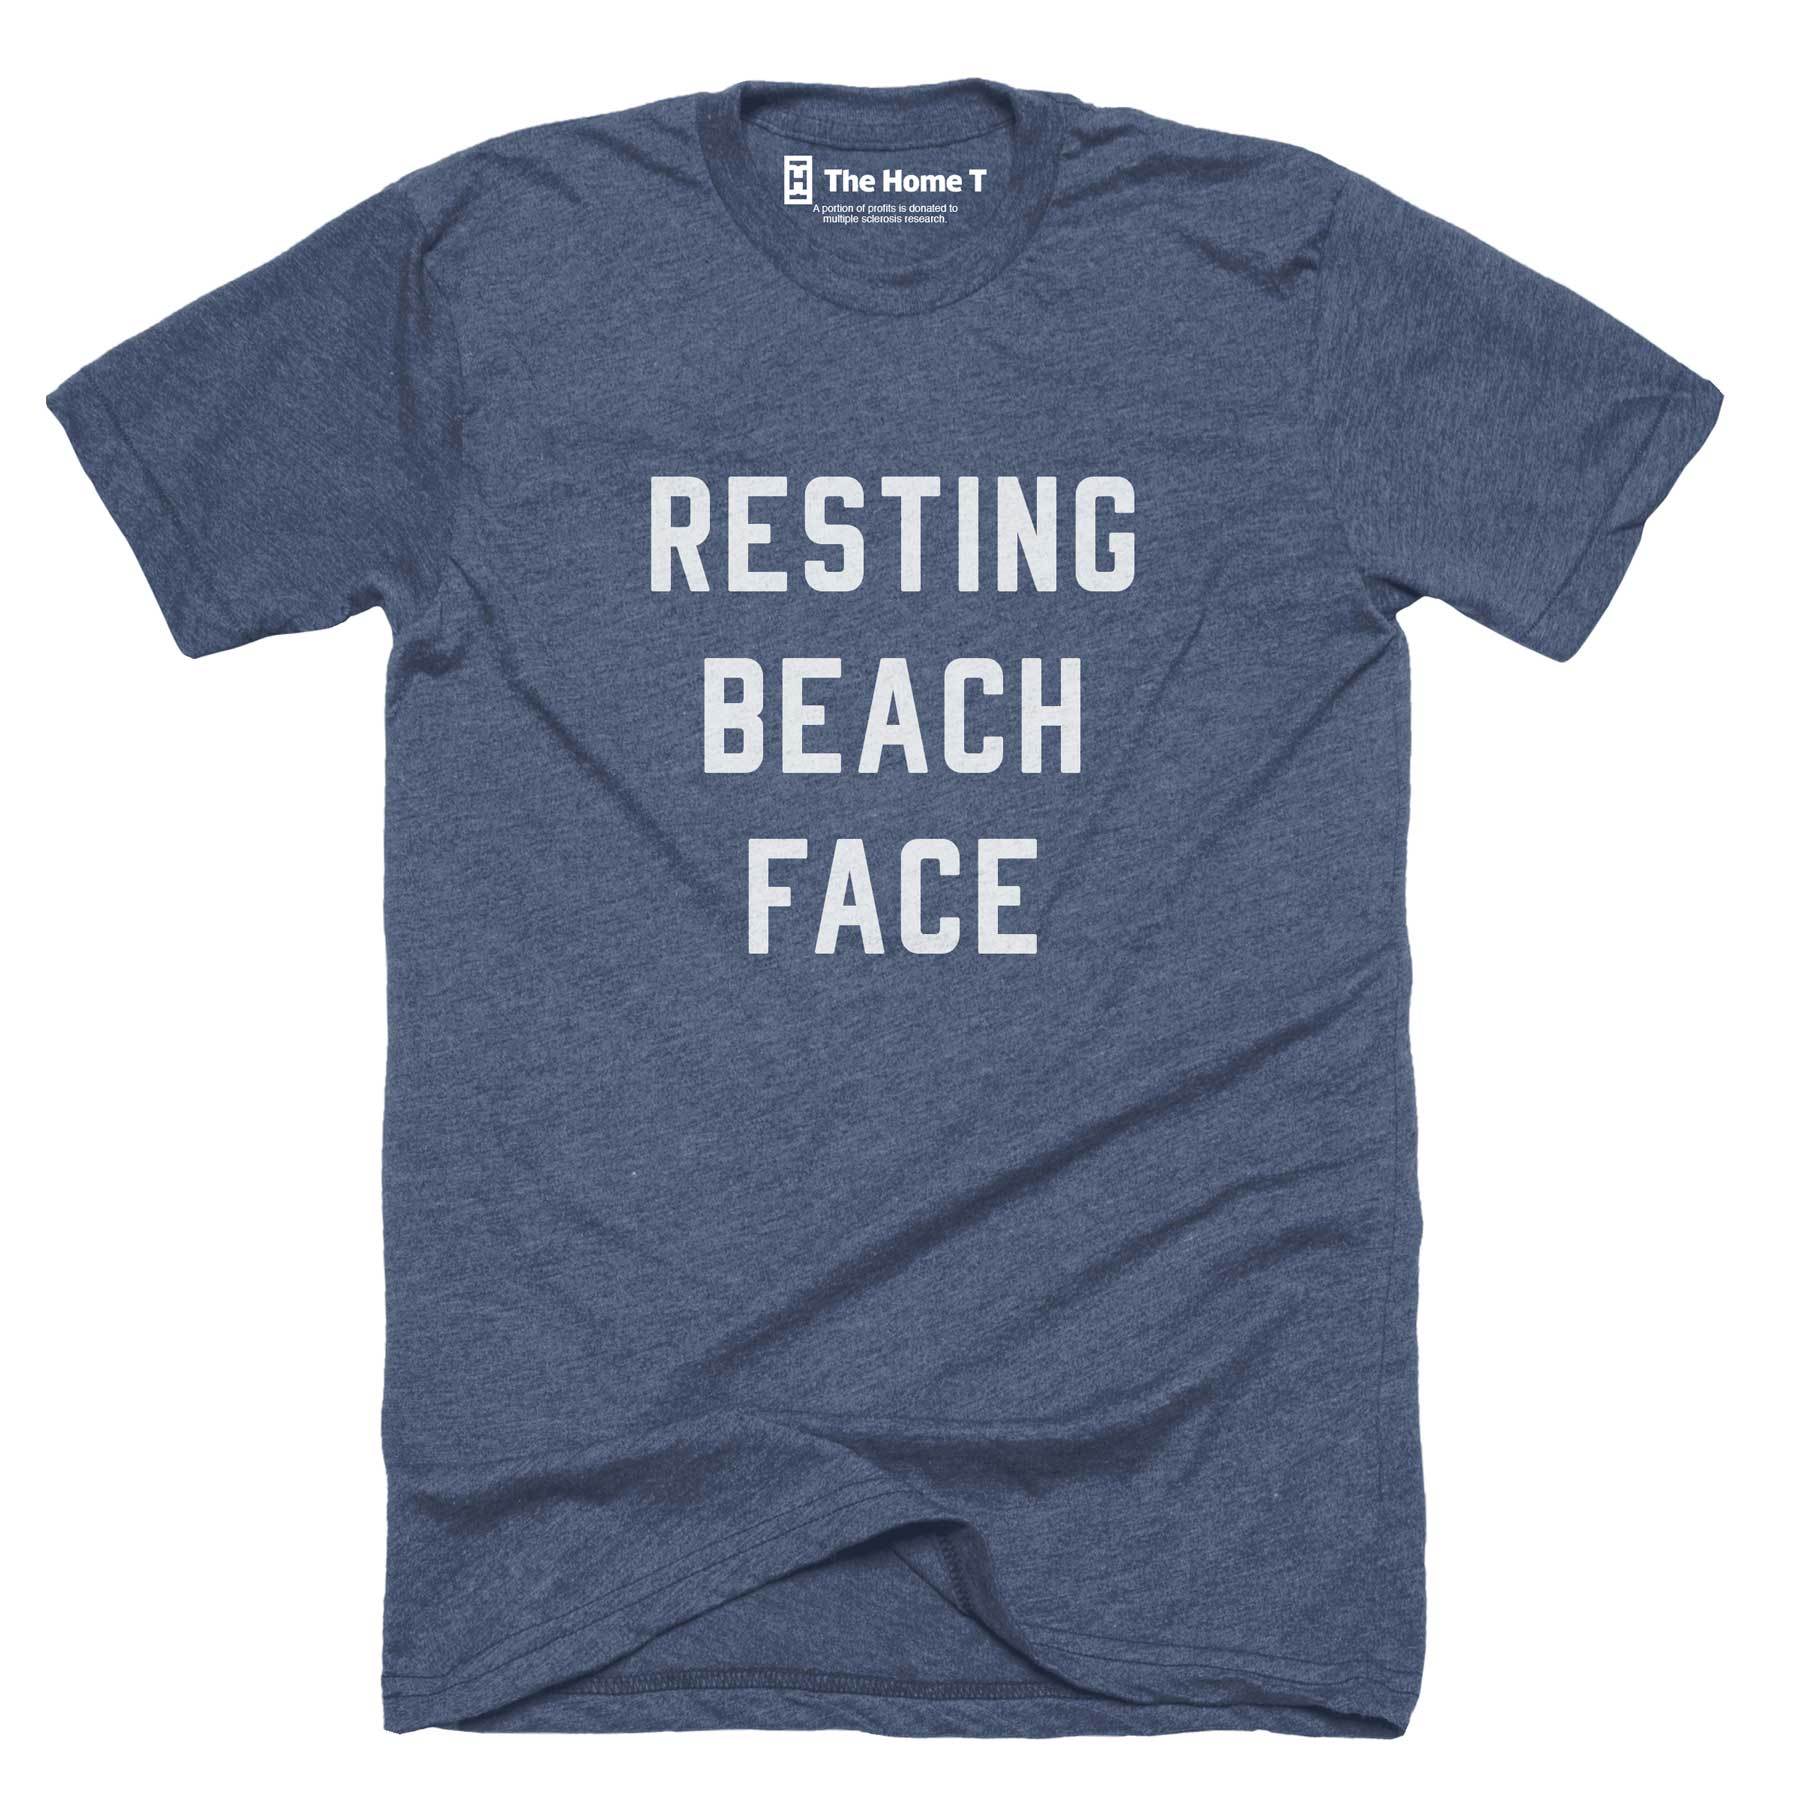 Resting Beach Face Crew neck The Home T